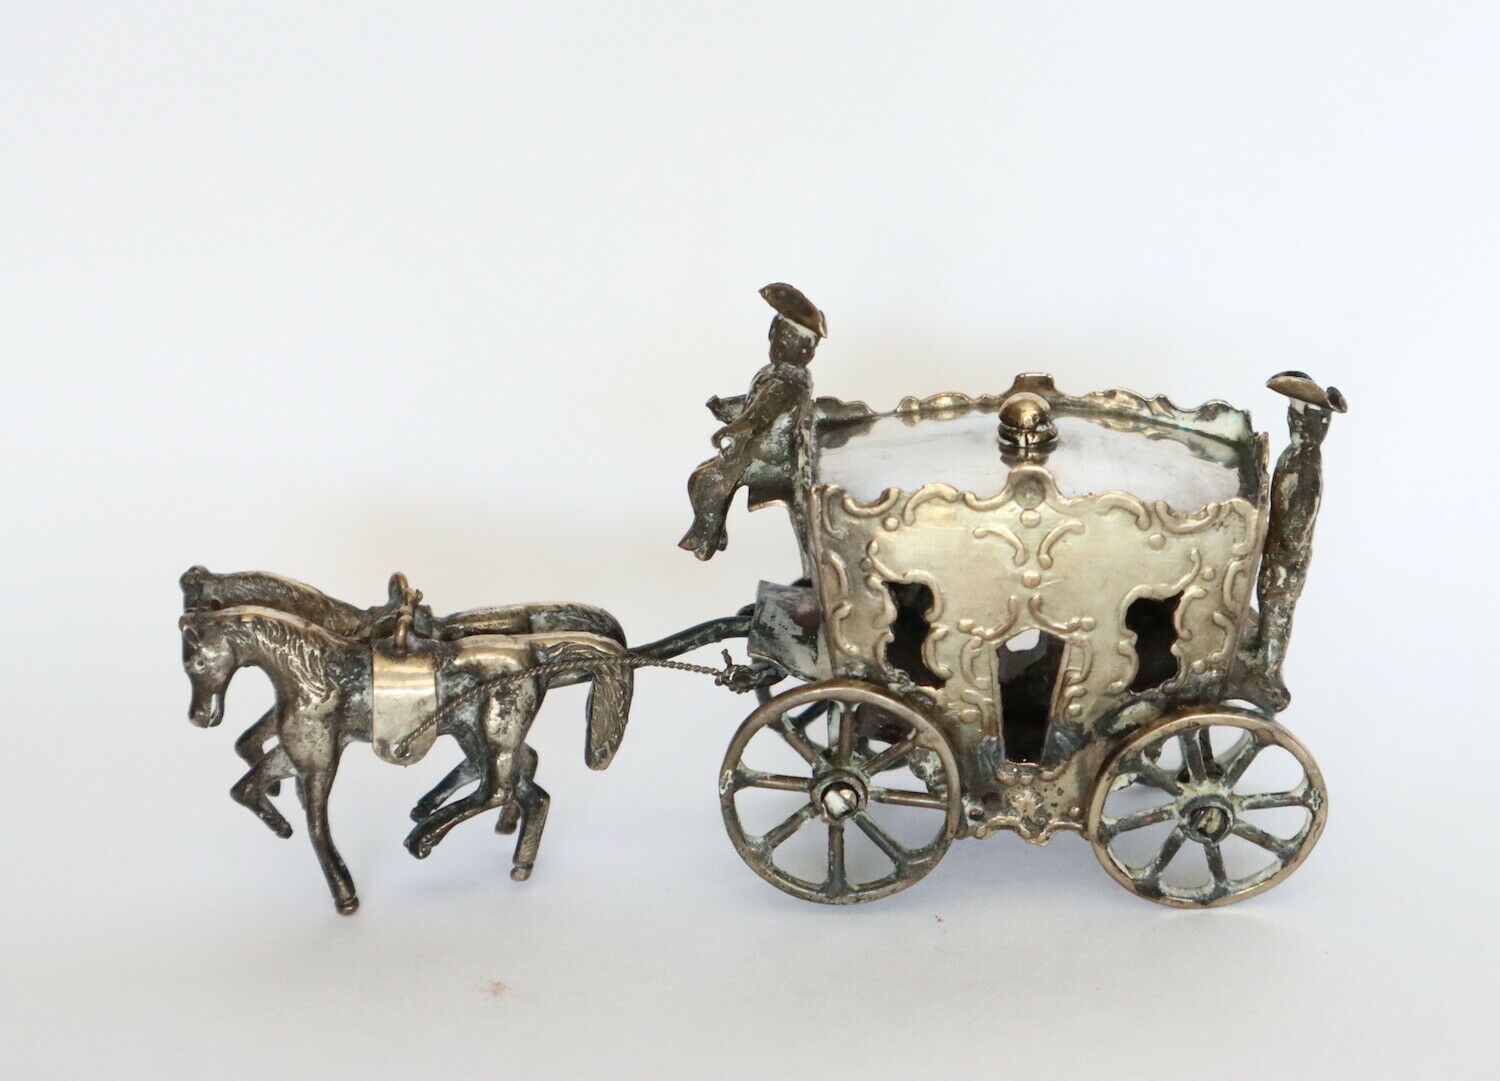 19th C. Dutch Silver Miniature Of Carriage With Horses, Coachman And Guard Behin